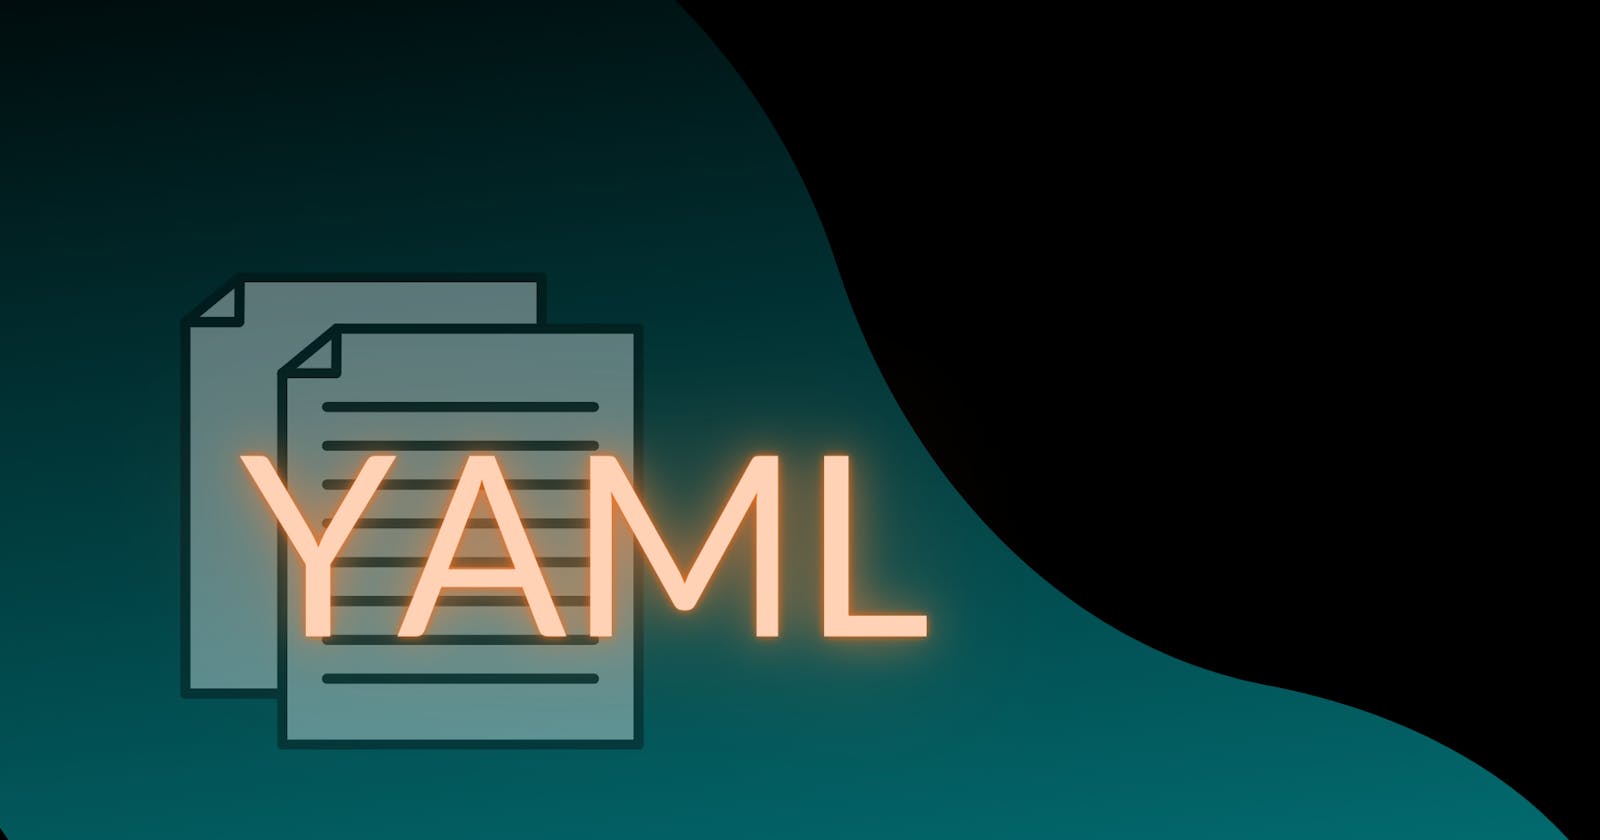 Let's begin with YAML